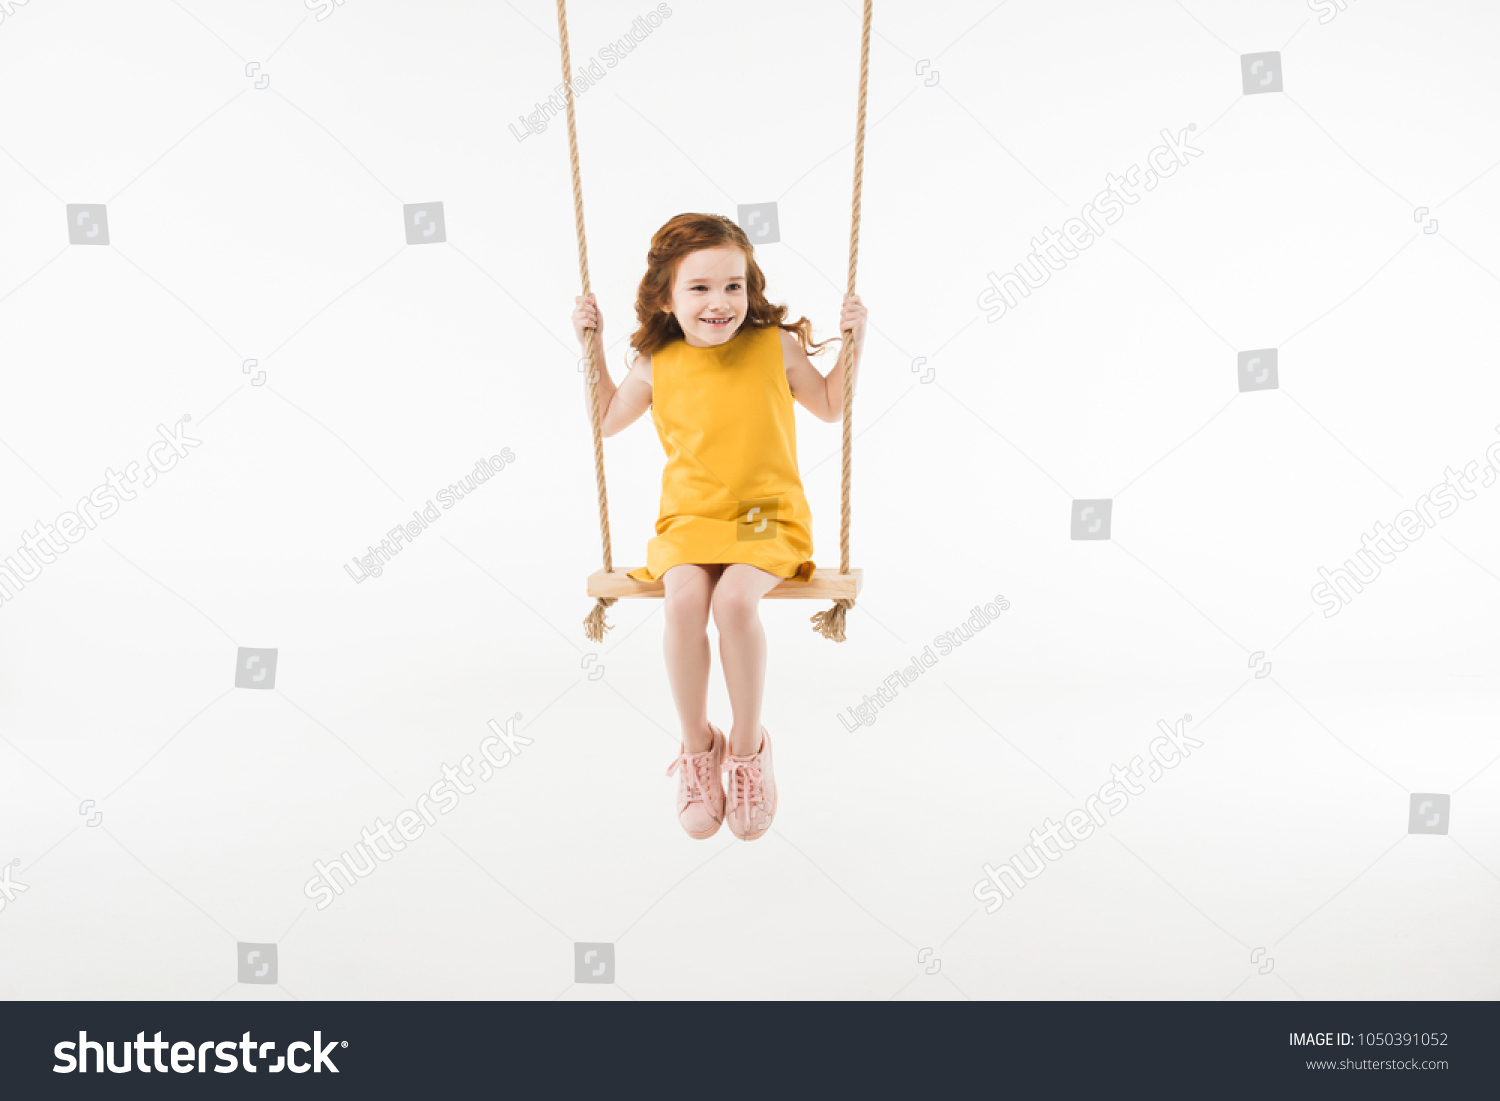 Little stylish child in dress riding on swing isolated on white #1050391052